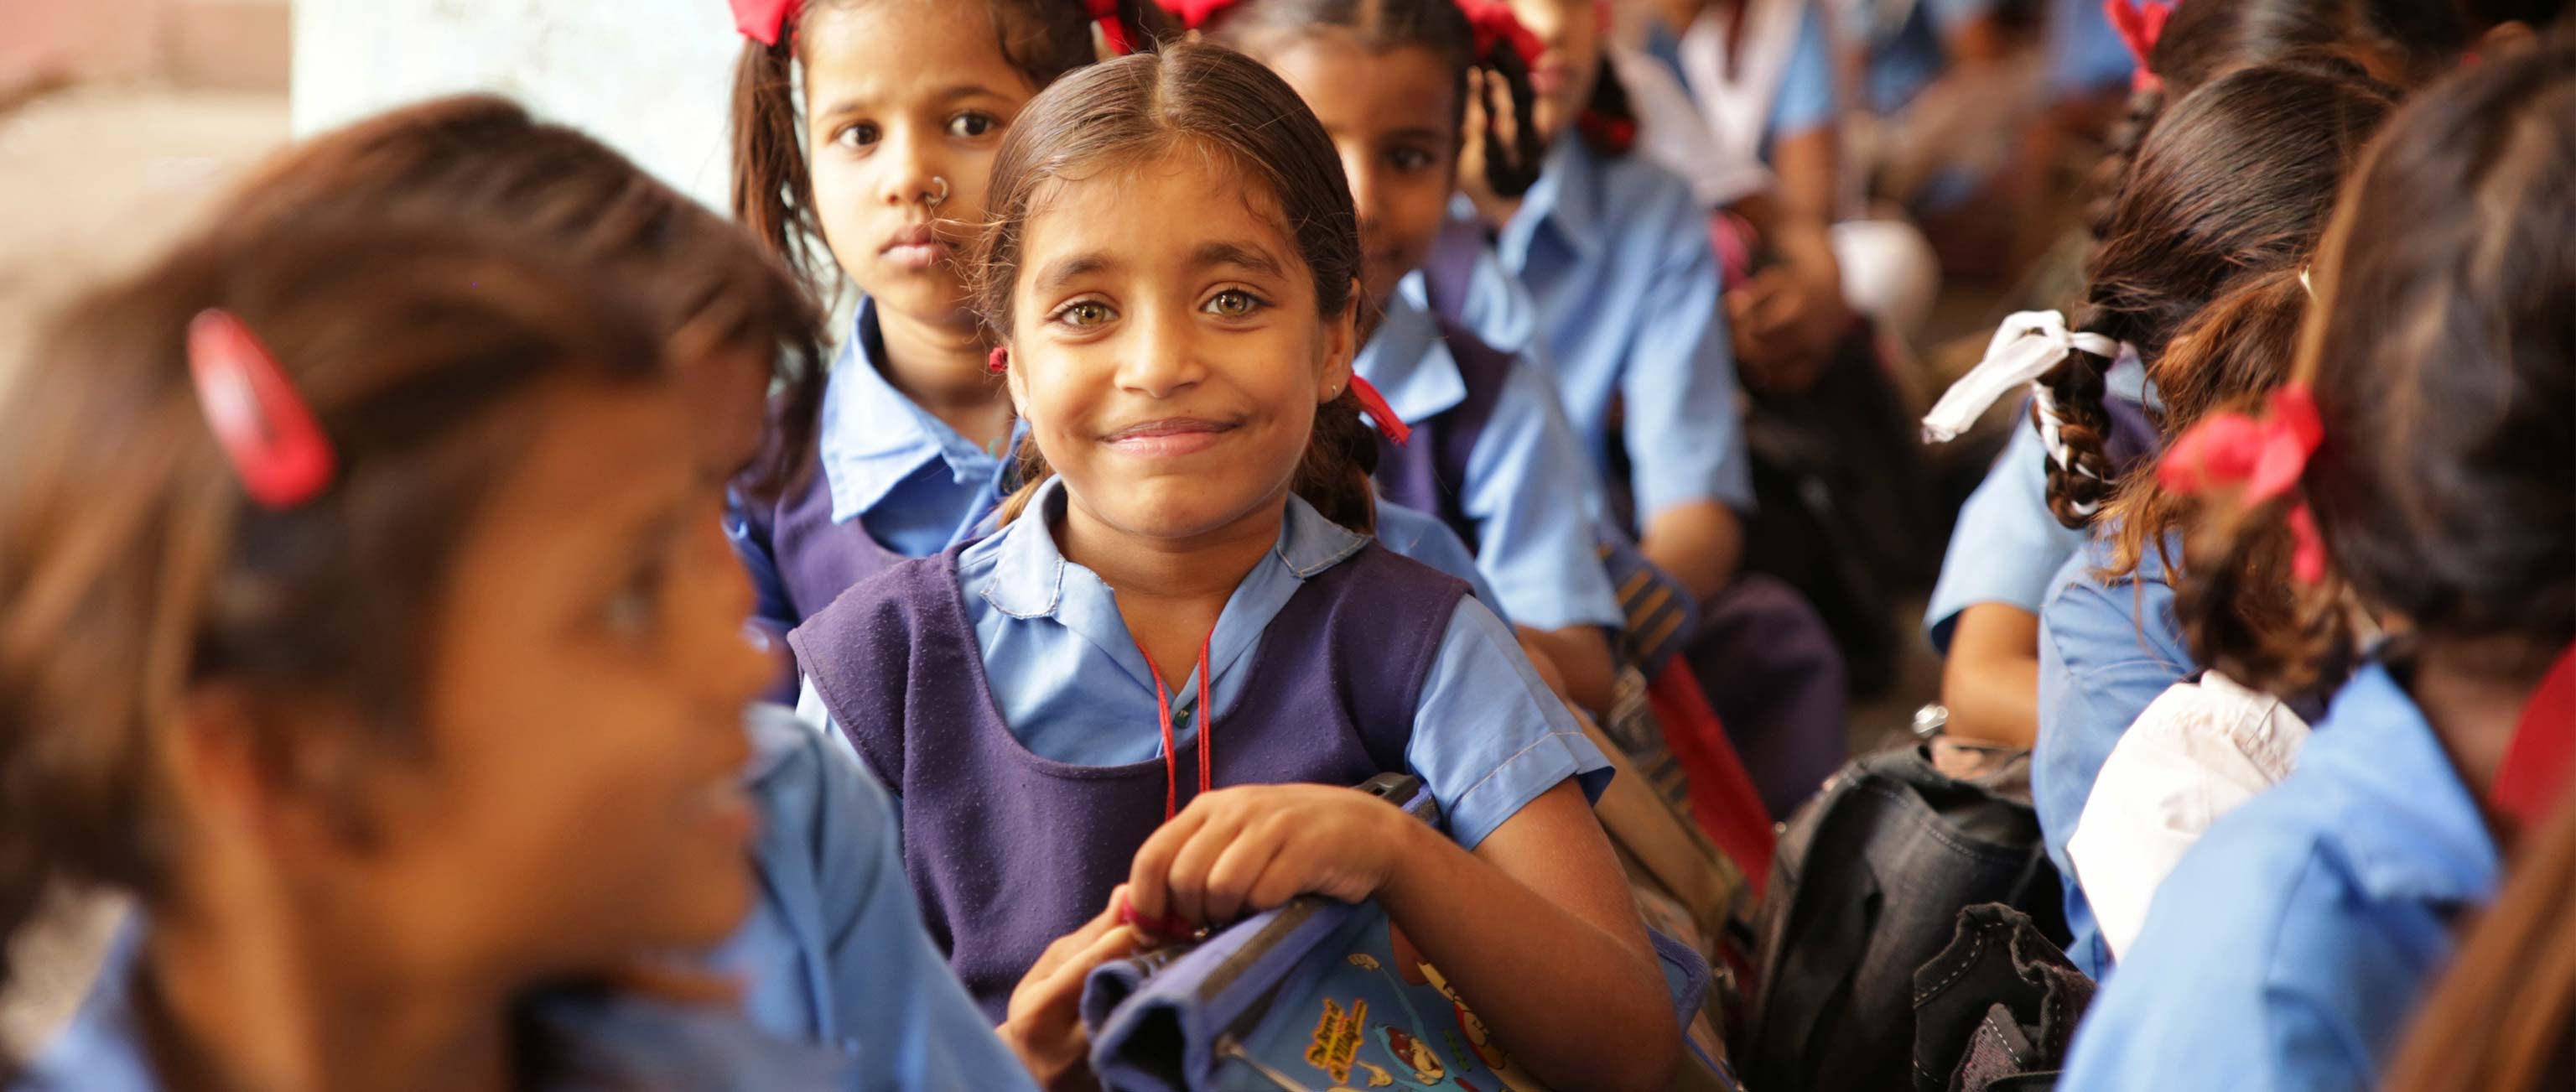 World’s First Development Impact Bond for Education: What Educate Girls Has Learned